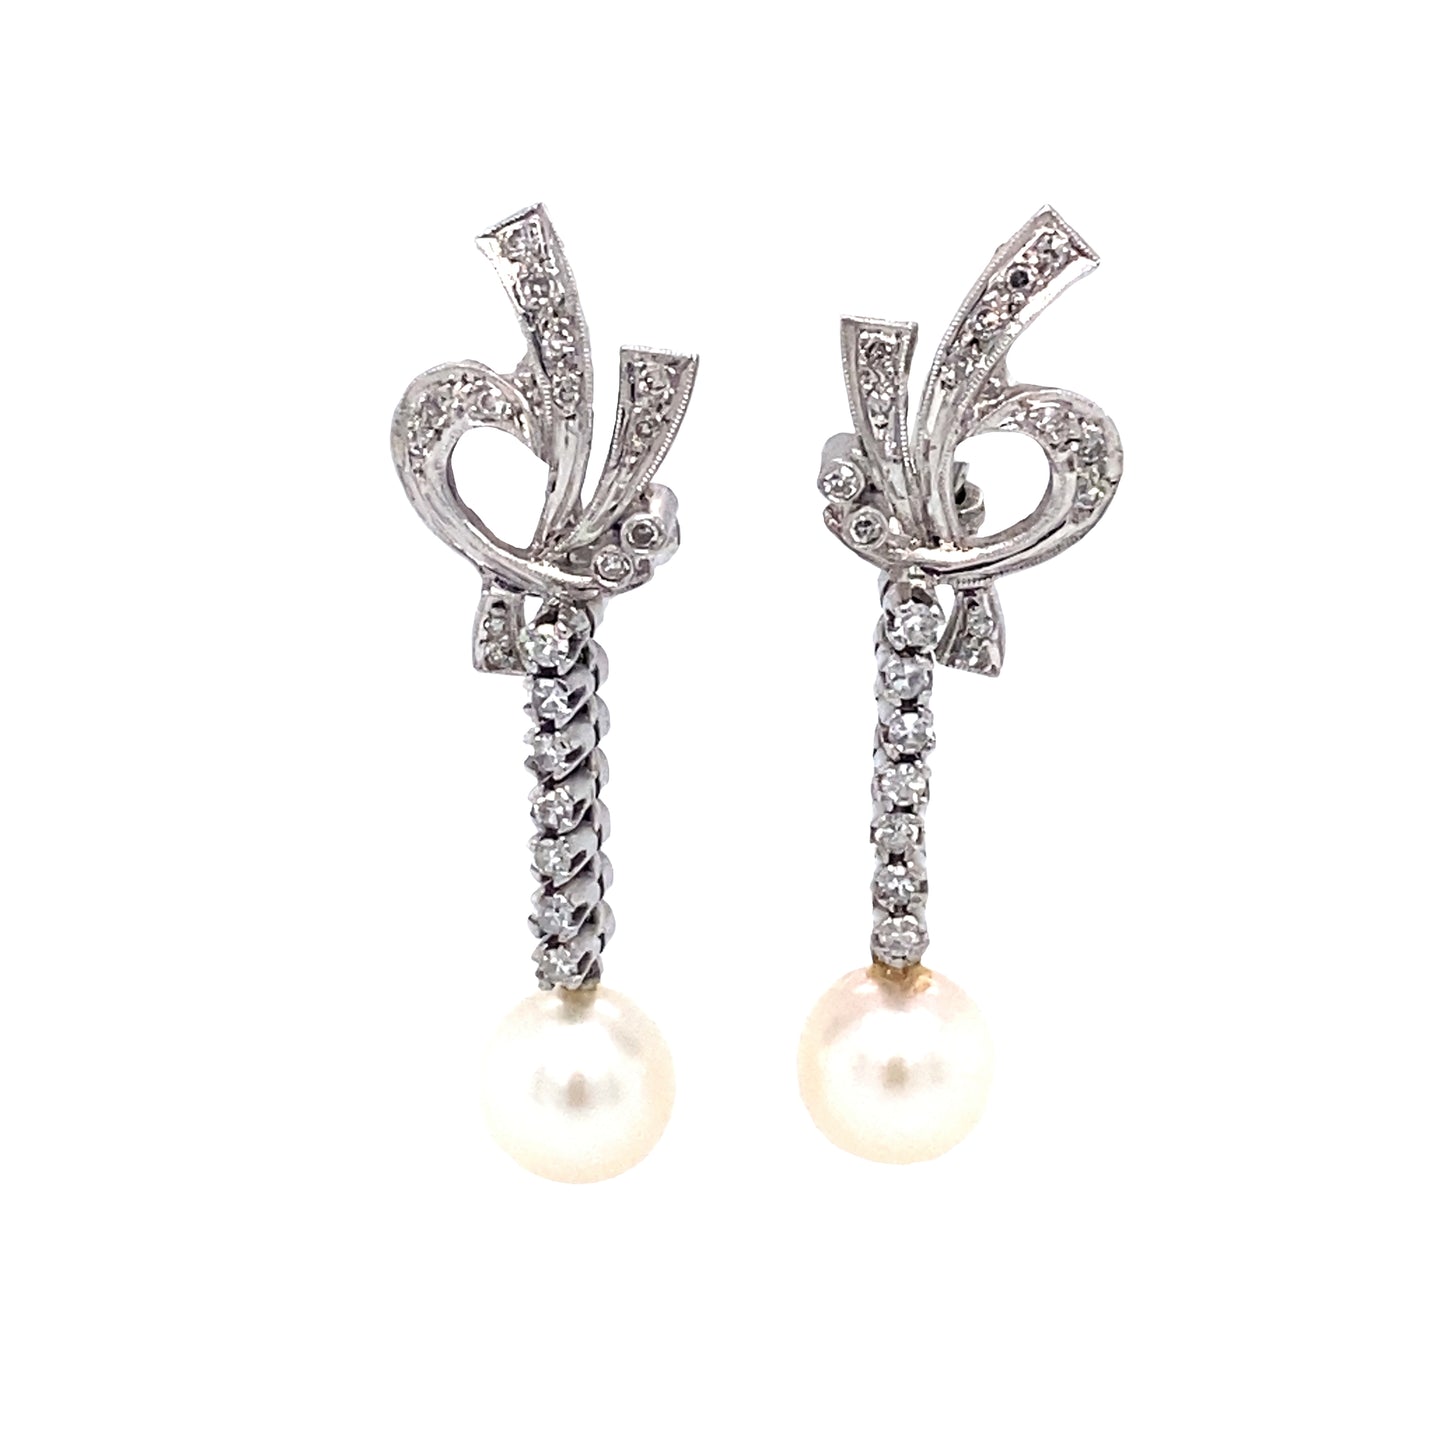 Vintage 1960s Pearl Drop Earrings with Diamonds in 14K White Gold and Platinum